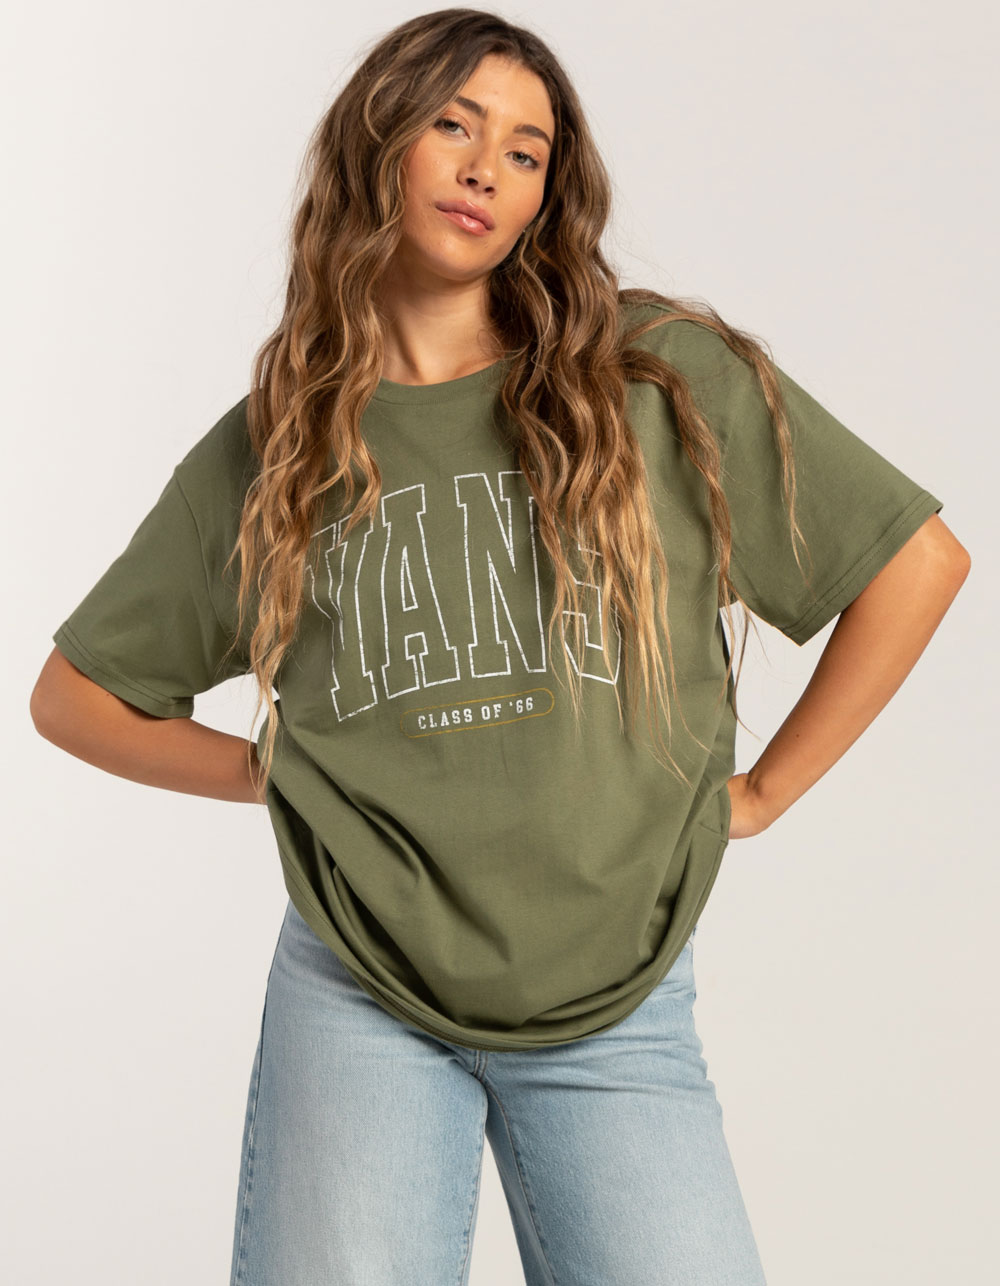 Oversized T Shirts for Women,Womens Clearance Tops,Sales Today